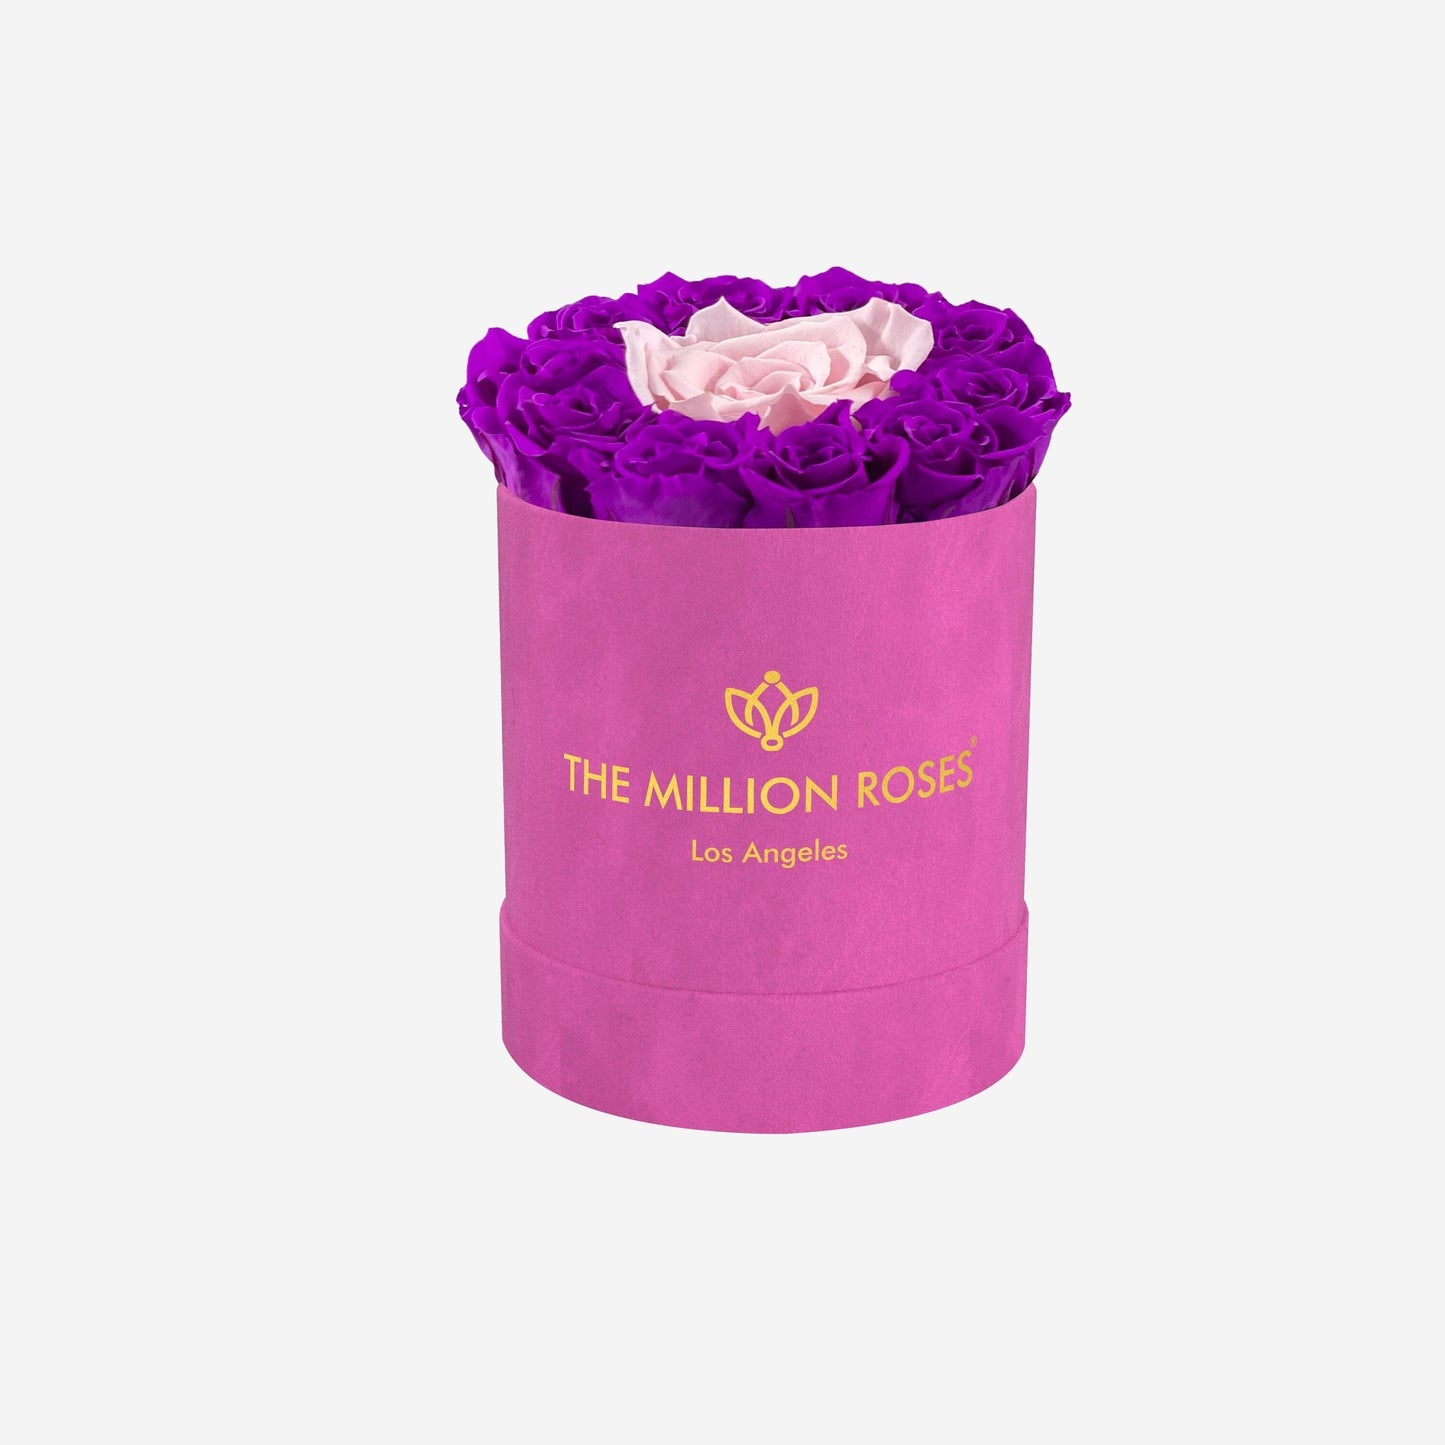 Basic Hot Pink Suede Box | Bright Purple & Light Pink Mini Roses - The Million Roses